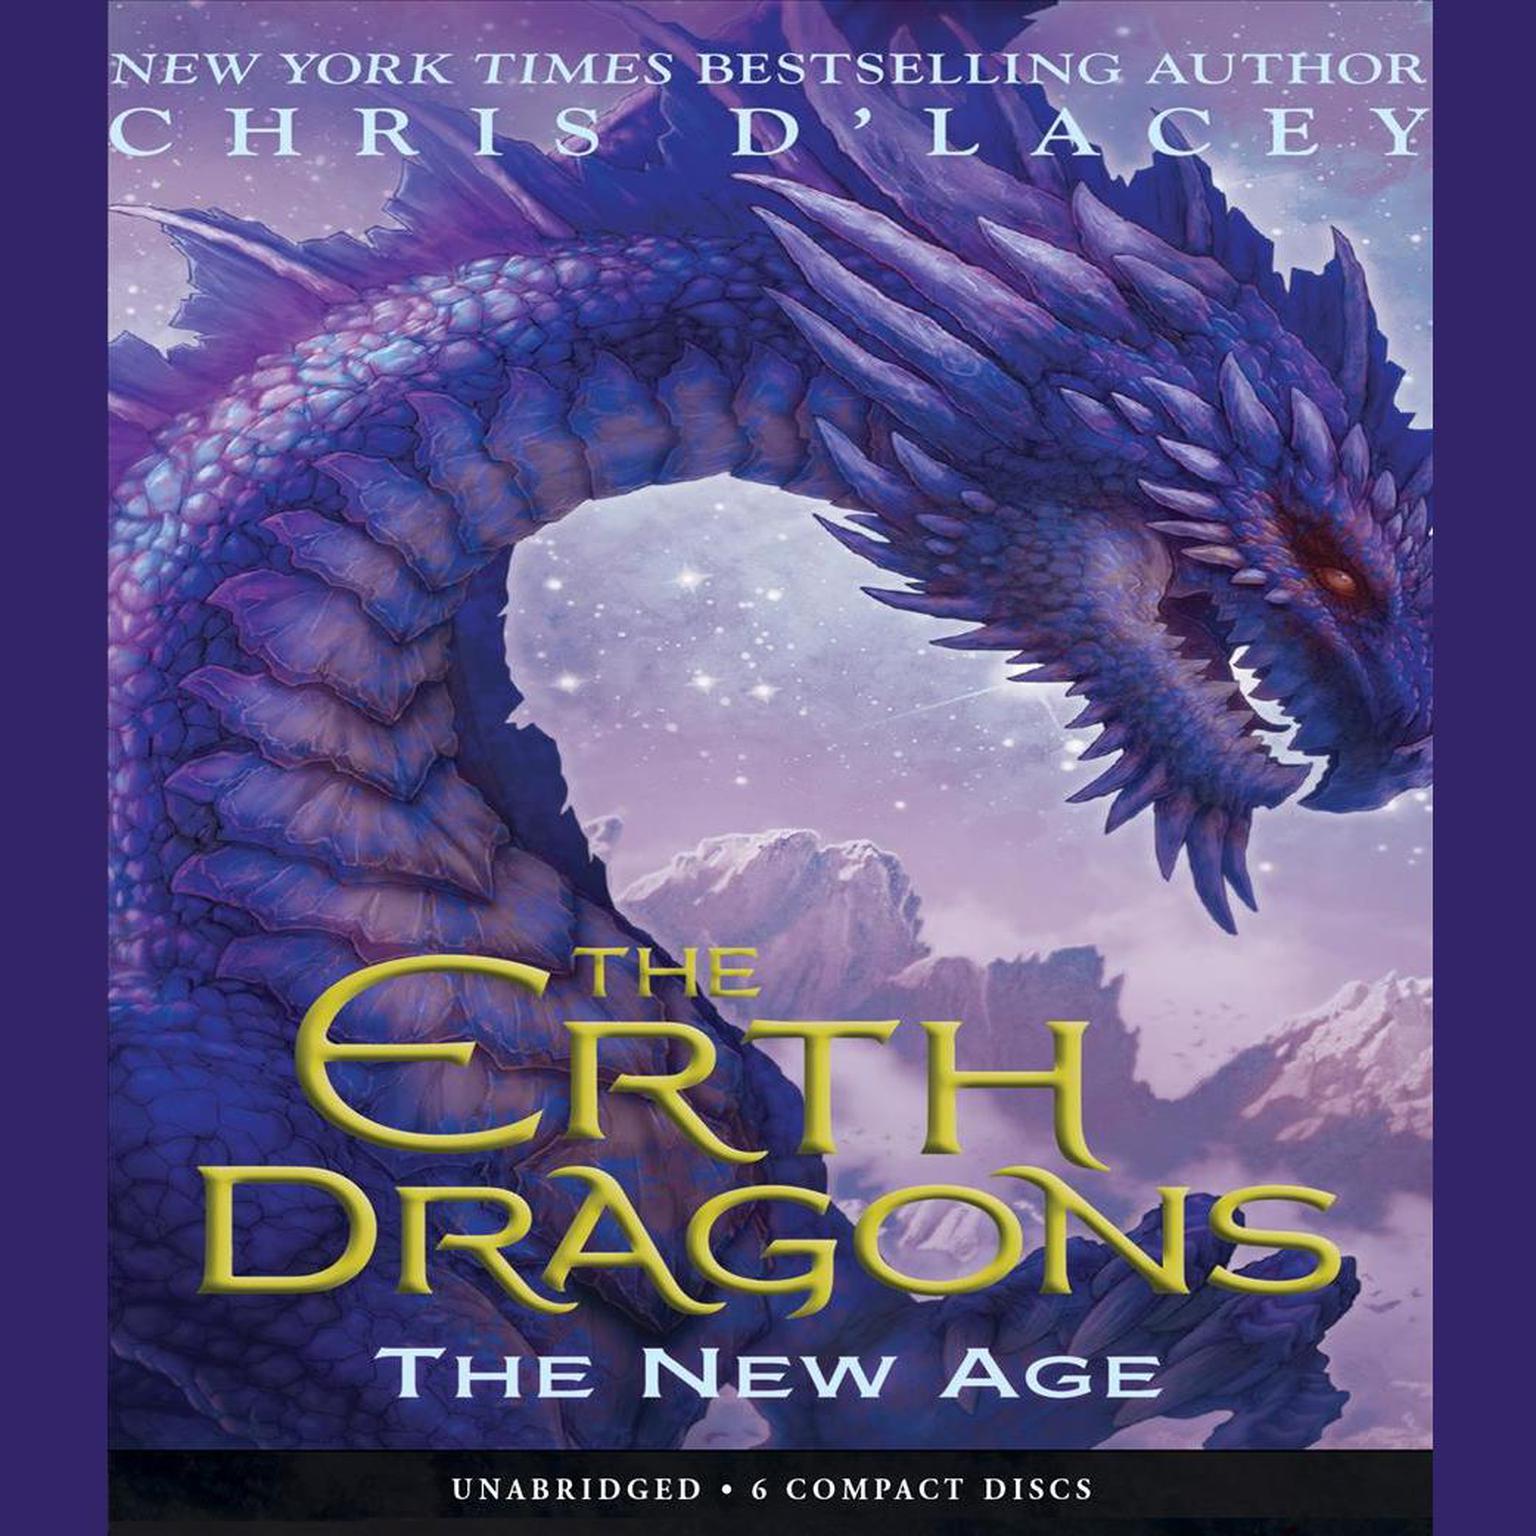 The New Age (The Erth Dragons #3) Audiobook, by Chris d’Lacey